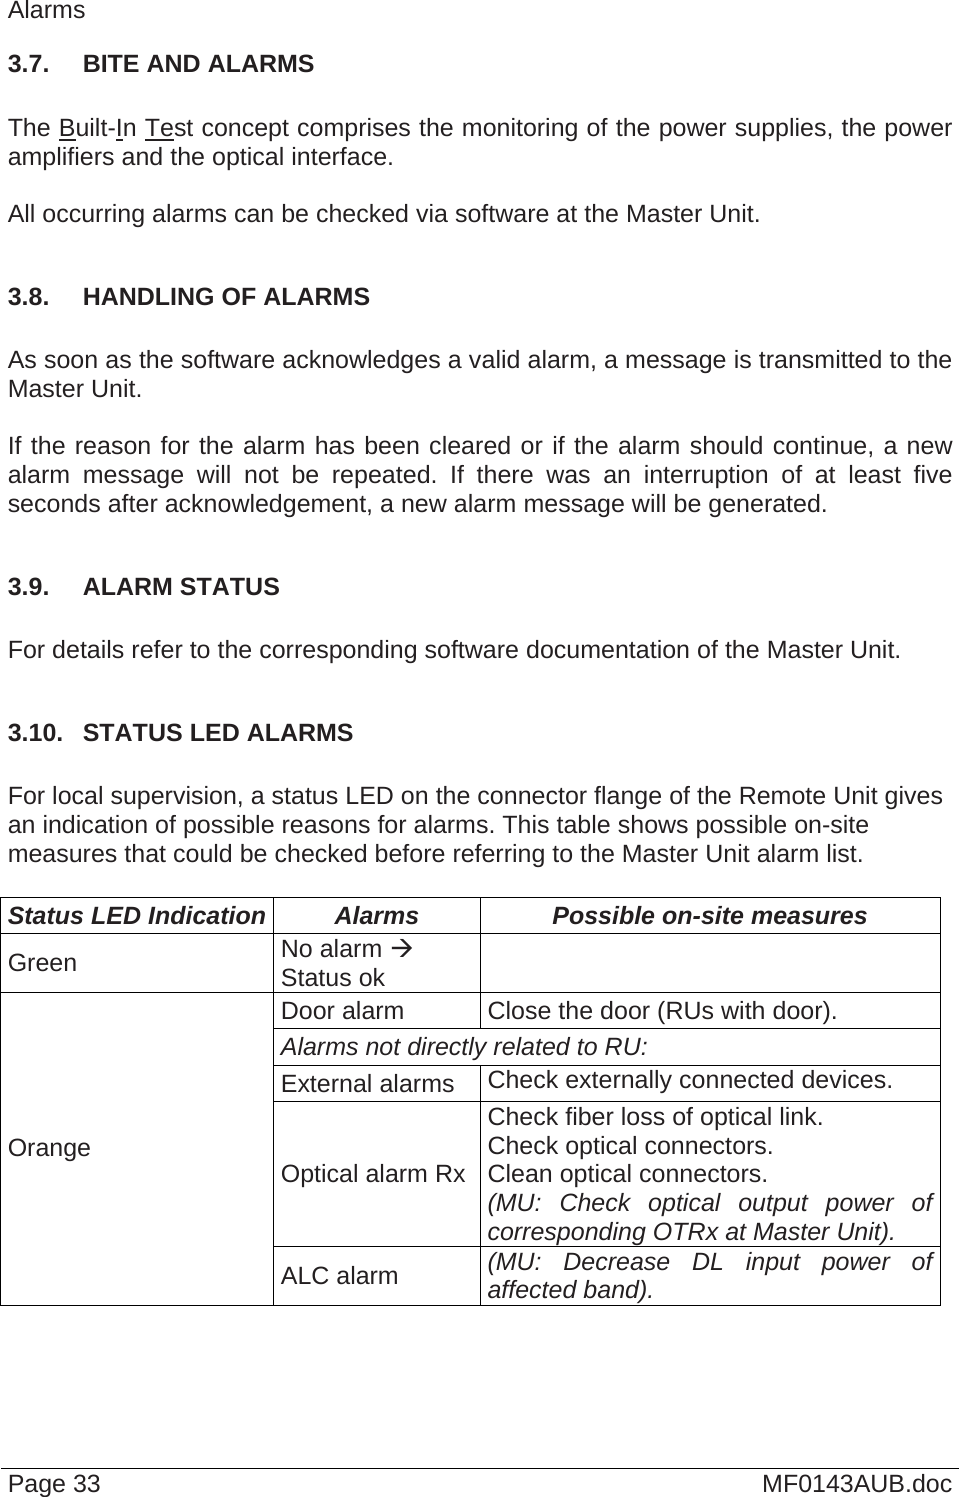  Page 33  MF0143AUB.doc Alarms 3.7.  BITE AND ALARMS  The Built-In Test concept comprises the monitoring of the power supplies, the power amplifiers and the optical interface.  All occurring alarms can be checked via software at the Master Unit.  3.8.  HANDLING OF ALARMS  As soon as the software acknowledges a valid alarm, a message is transmitted to the Master Unit.  If the reason for the alarm has been cleared or if the alarm should continue, a new alarm message will not be repeated. If there was an interruption of at least five seconds after acknowledgement, a new alarm message will be generated.  3.9.  ALARM STATUS  For details refer to the corresponding software documentation of the Master Unit.  3.10.  STATUS LED ALARMS  For local supervision, a status LED on the connector flange of the Remote Unit gives an indication of possible reasons for alarms. This table shows possible on-site measures that could be checked before referring to the Master Unit alarm list.  Status LED Indication  Alarms  Possible on-site measures Green  No alarm  Status ok   Door alarm  Close the door (RUs with door). Alarms not directly related to RU:  External alarms  Check externally connected devices. Optical alarm Rx Check fiber loss of optical link. Check optical connectors. Clean optical connectors. (MU: Check optical output power of corresponding OTRx at Master Unit). Orange ALC alarm  (MU: Decrease DL input power of affected band). 